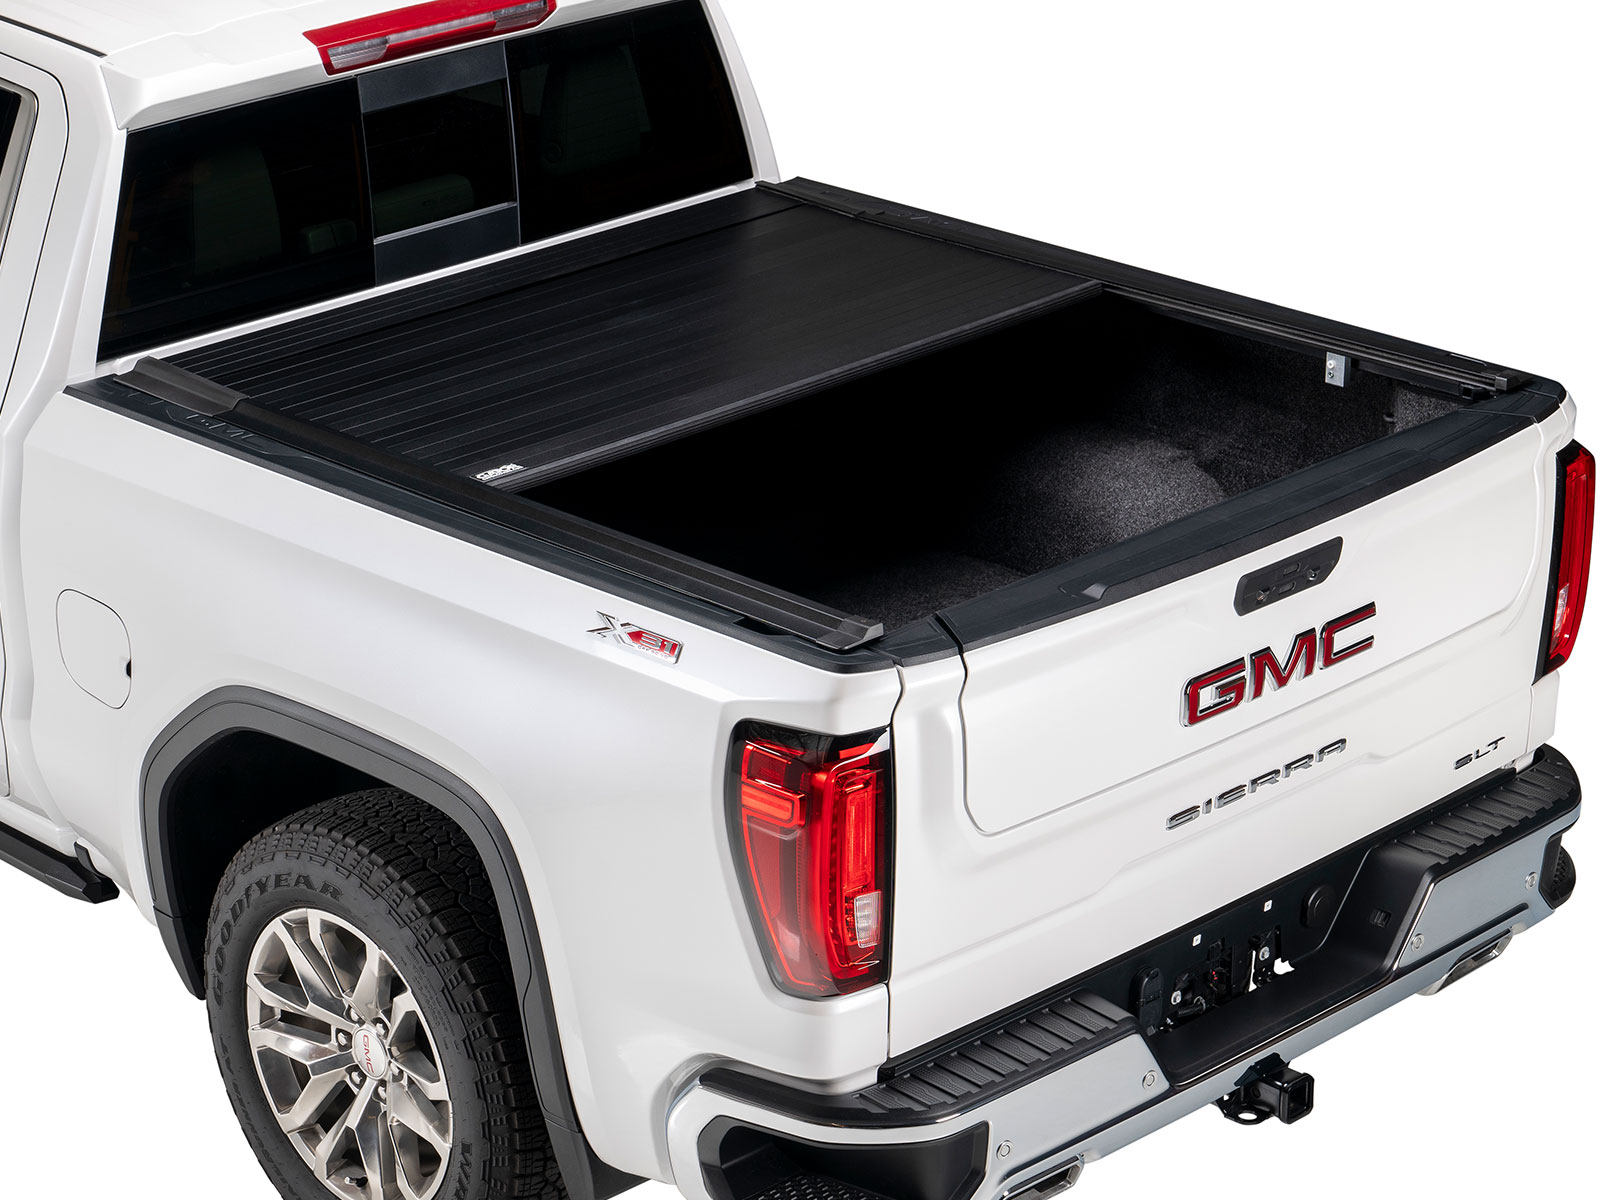 2012 Chevy Silverado 1500 Bed Covers & Tonneau Covers | RealTruck